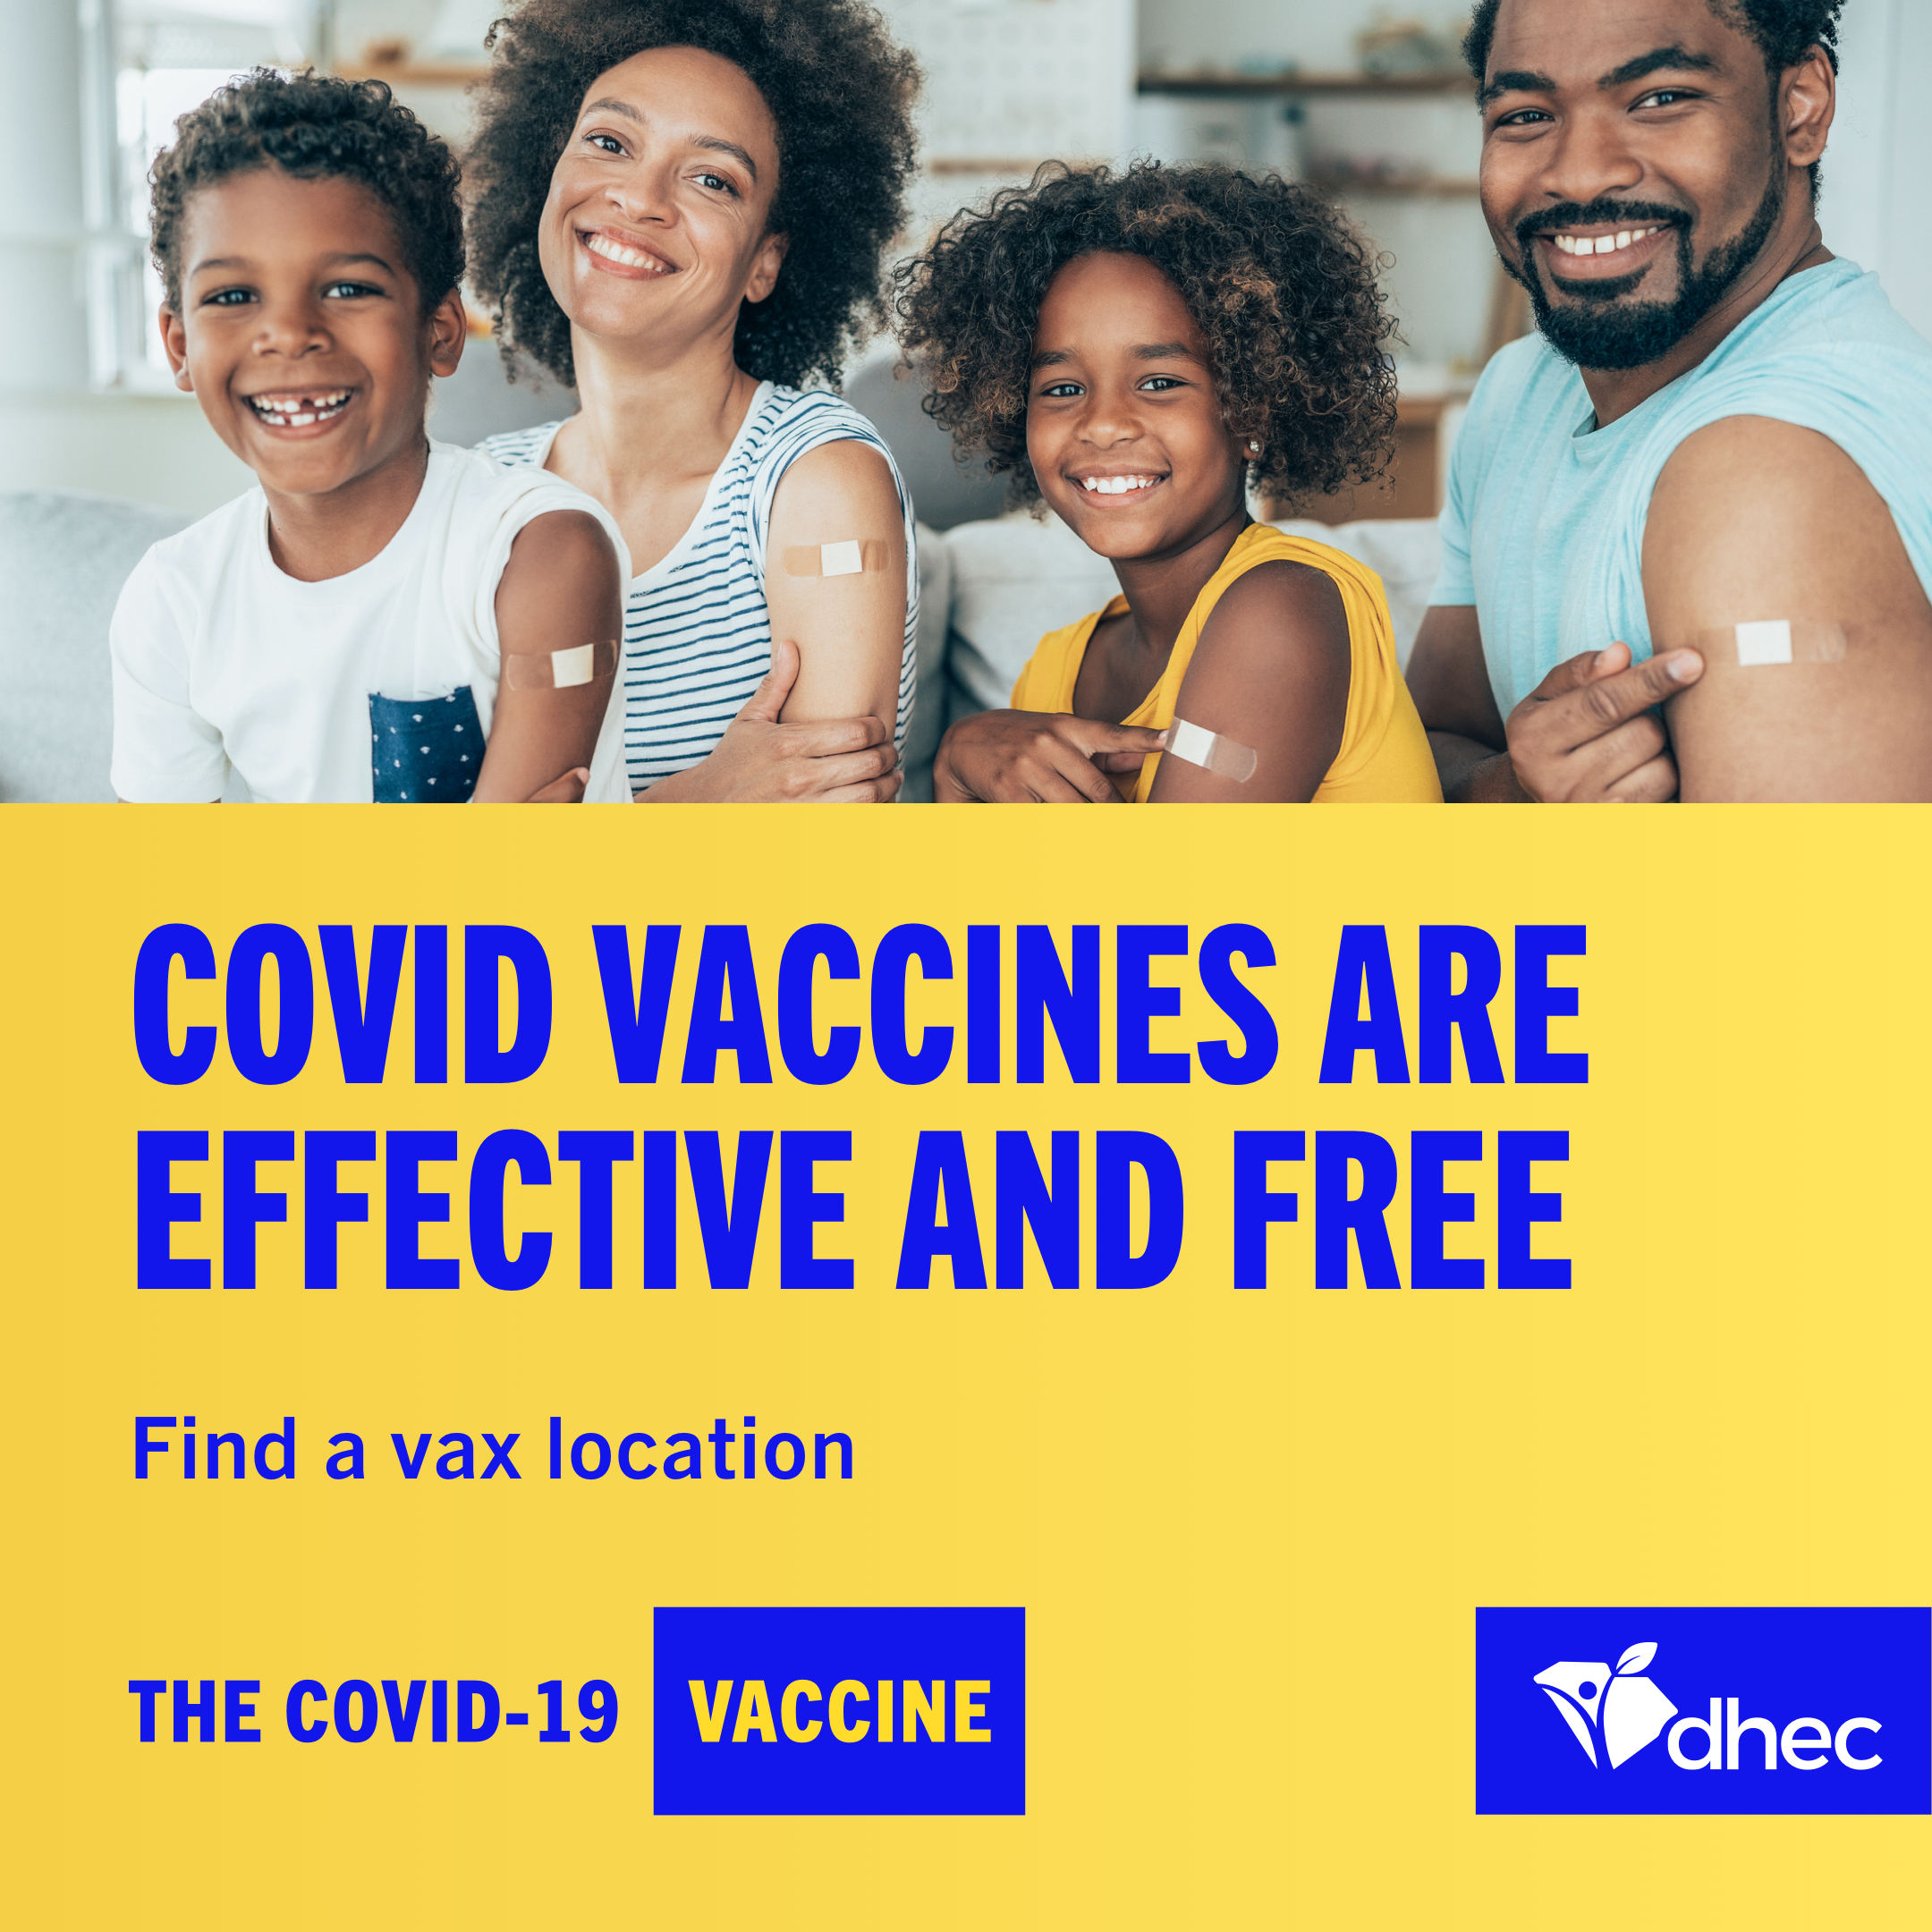 COVID vaccines are effective and free